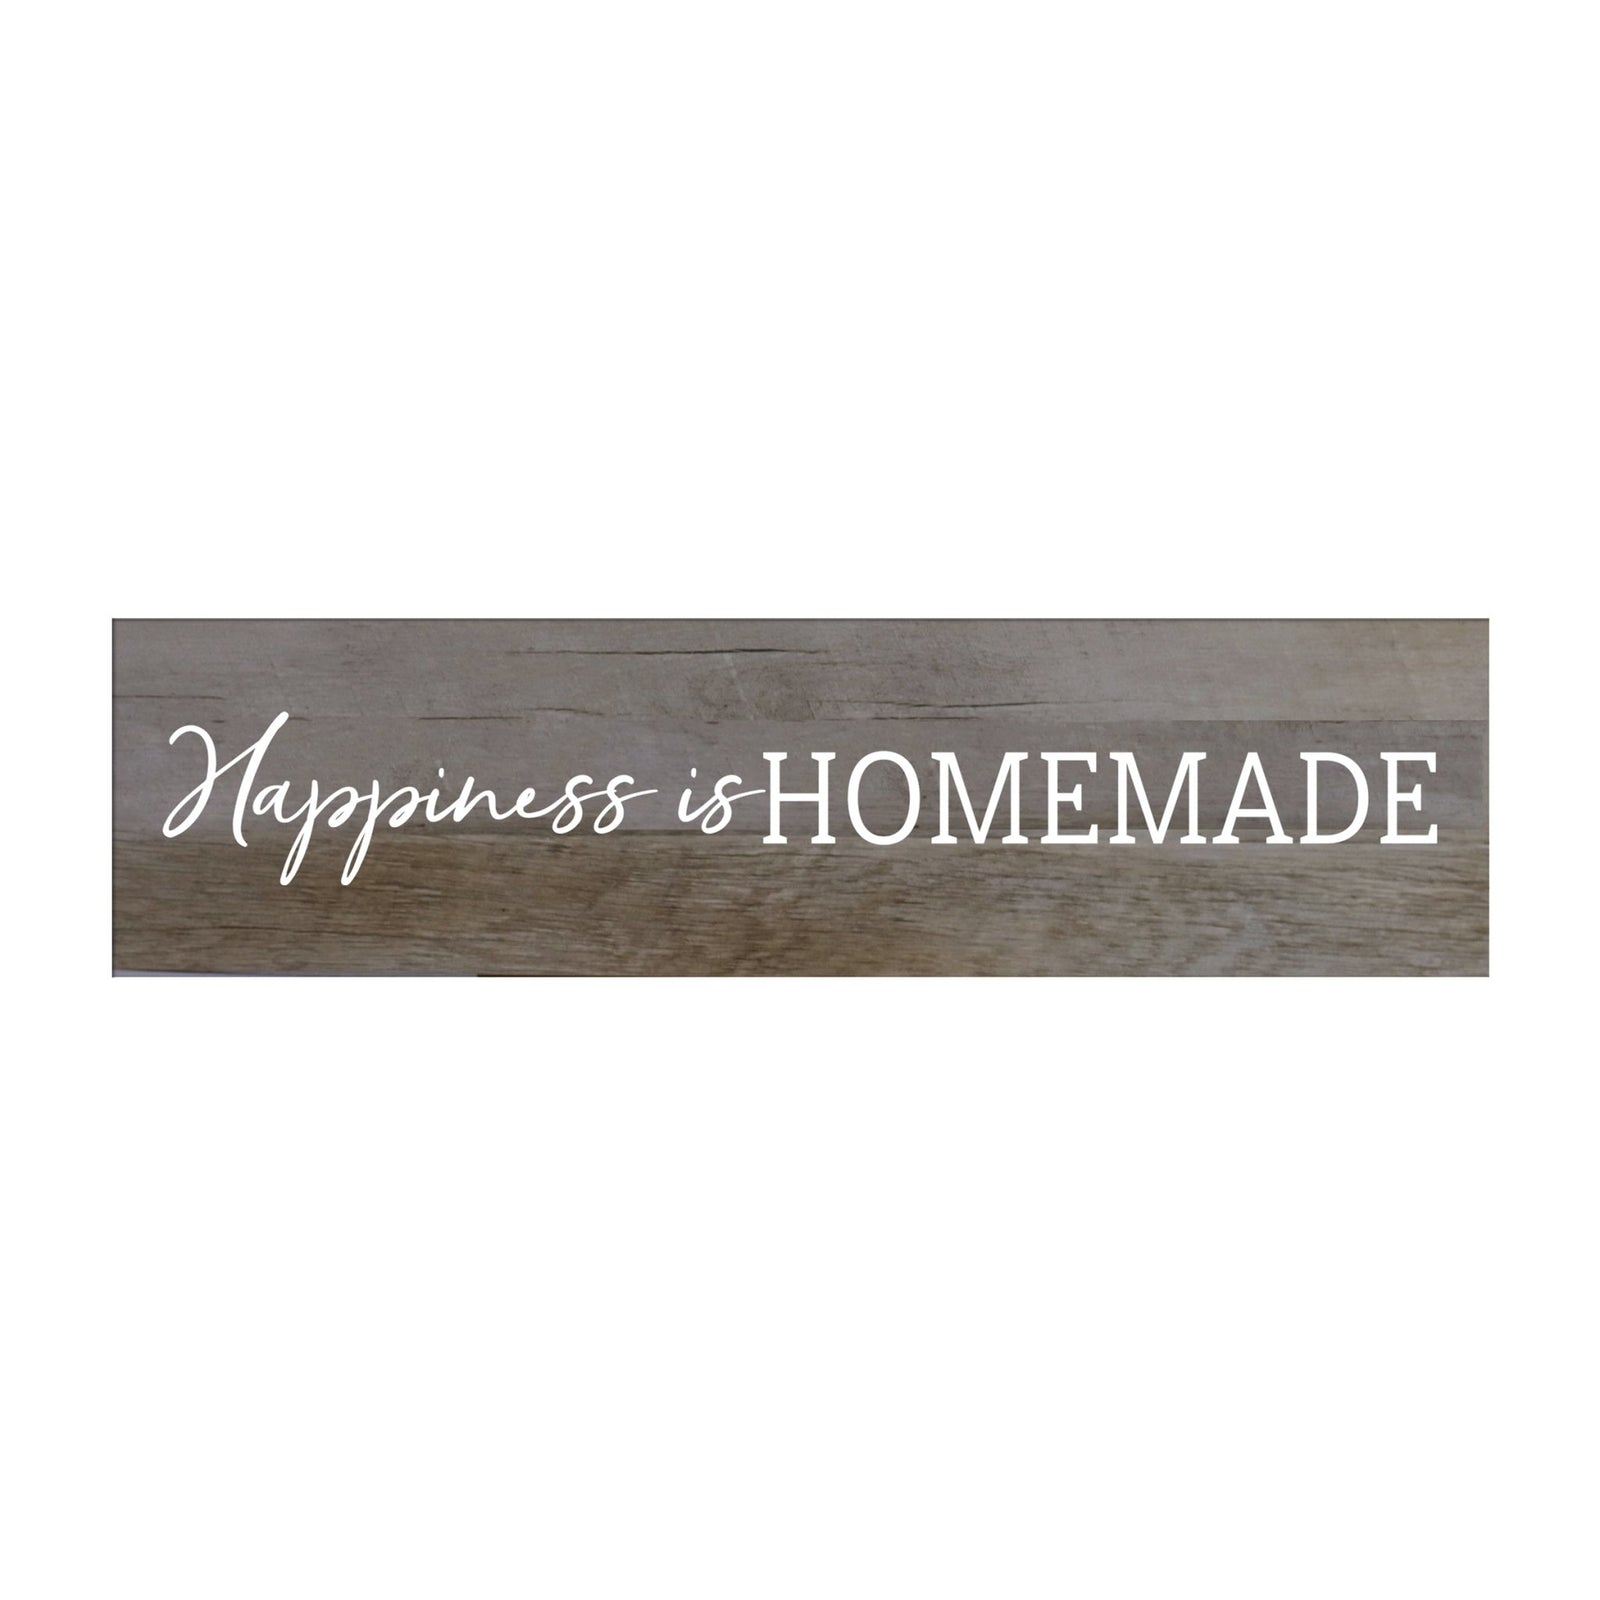 Inspirational Everyday Home and Family Wooden Wall Art Hanging Plaque 10 x 40 – Happiness Is Homemade - LifeSong Milestones